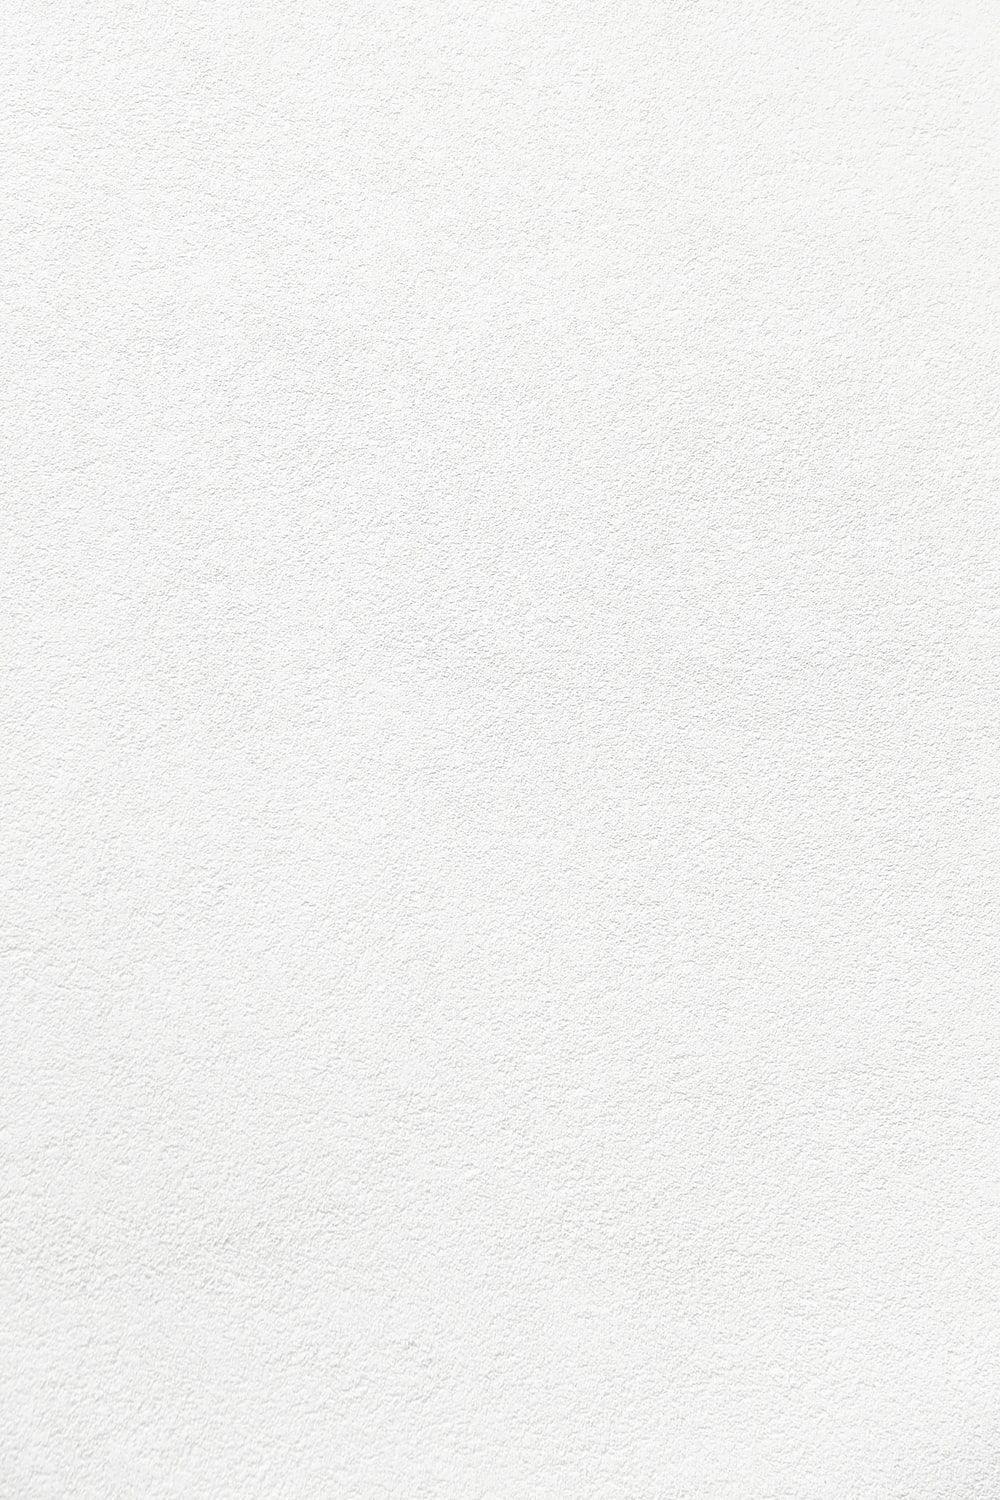 White Wall Picture [HD]. Download Free Image